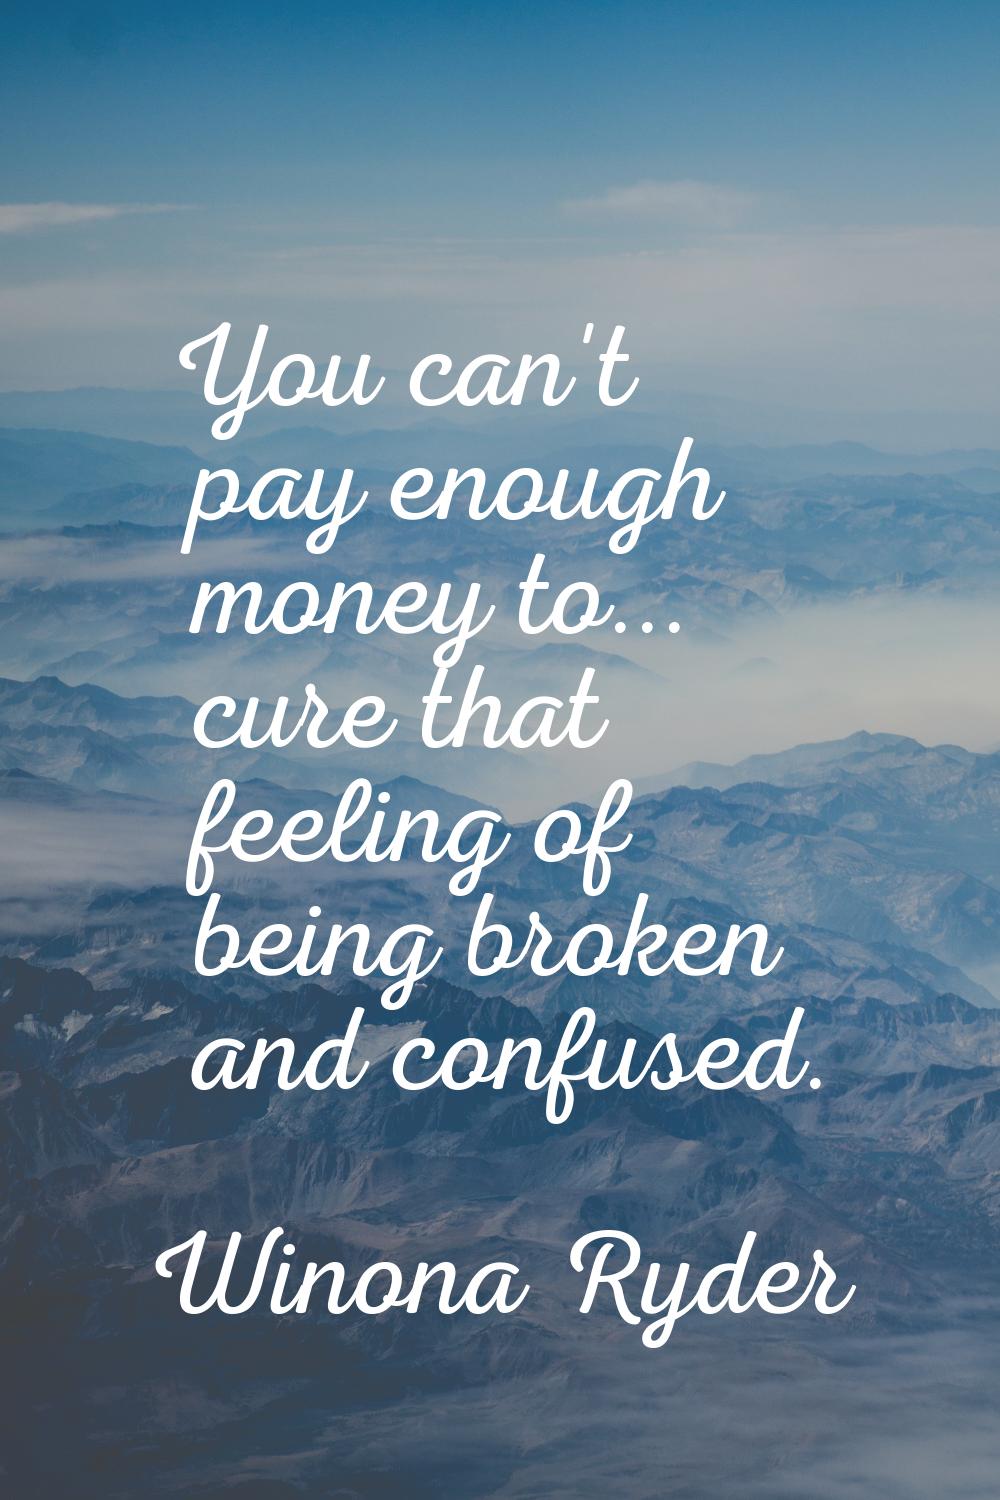 You can't pay enough money to... cure that feeling of being broken and confused.